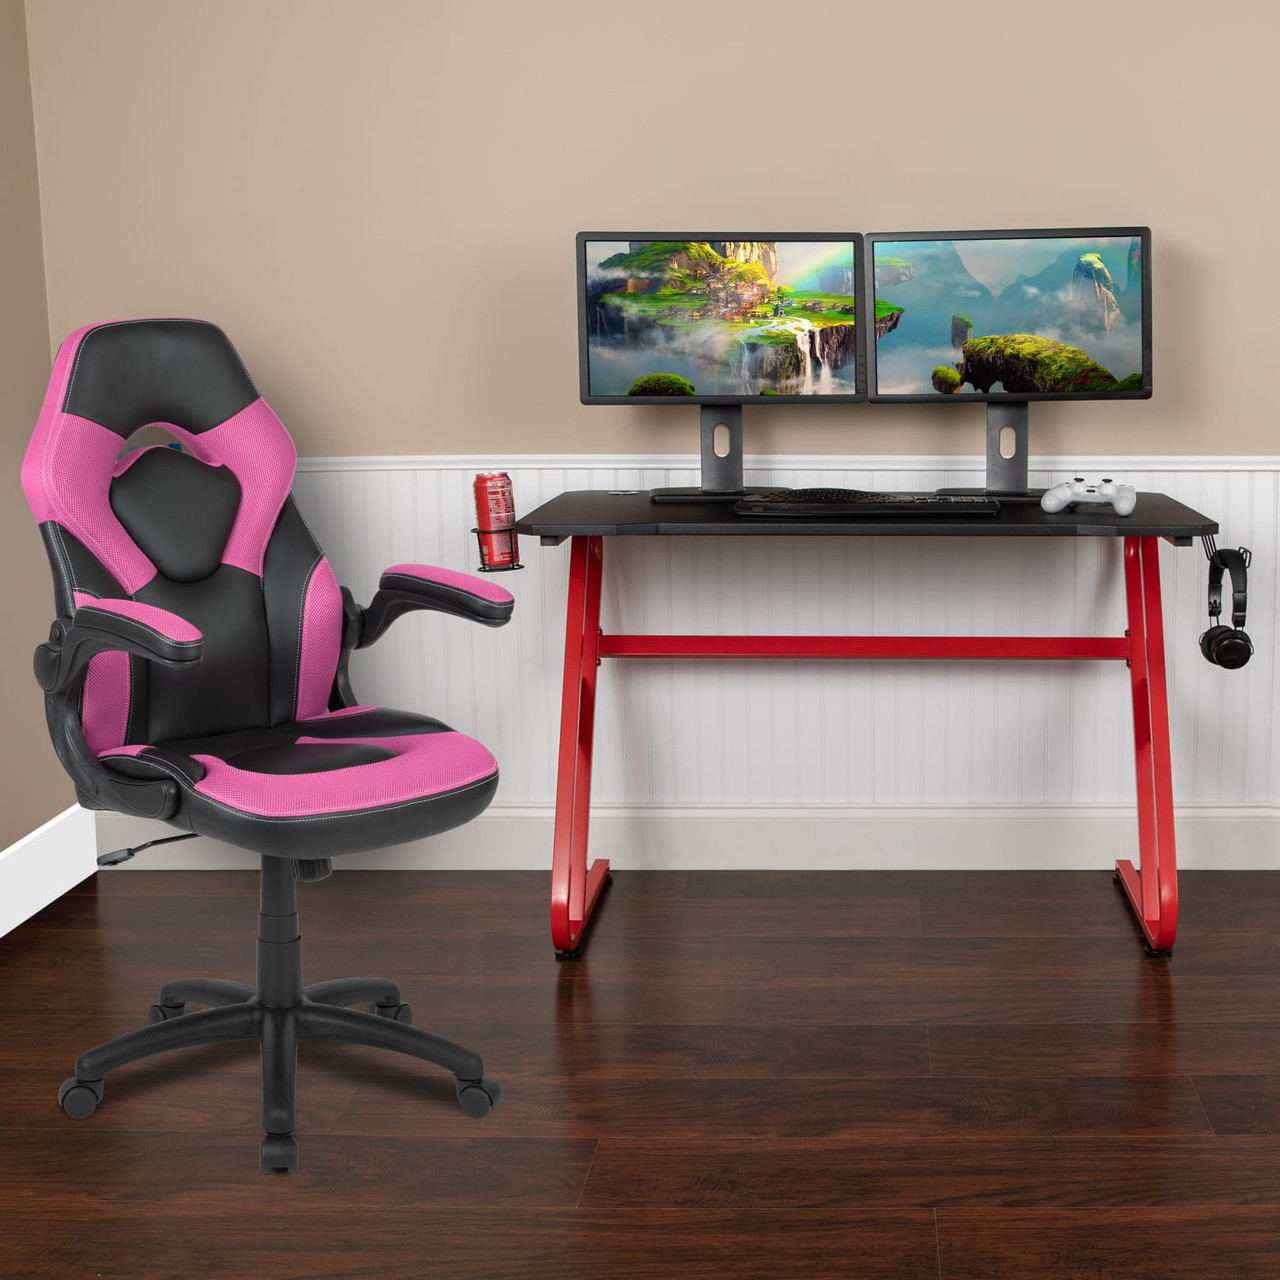 Red Gaming Desk and Pink/Black Racing Chair Set with Cup Holder and Headphone Hook - BLNX10RSG1030PKGG